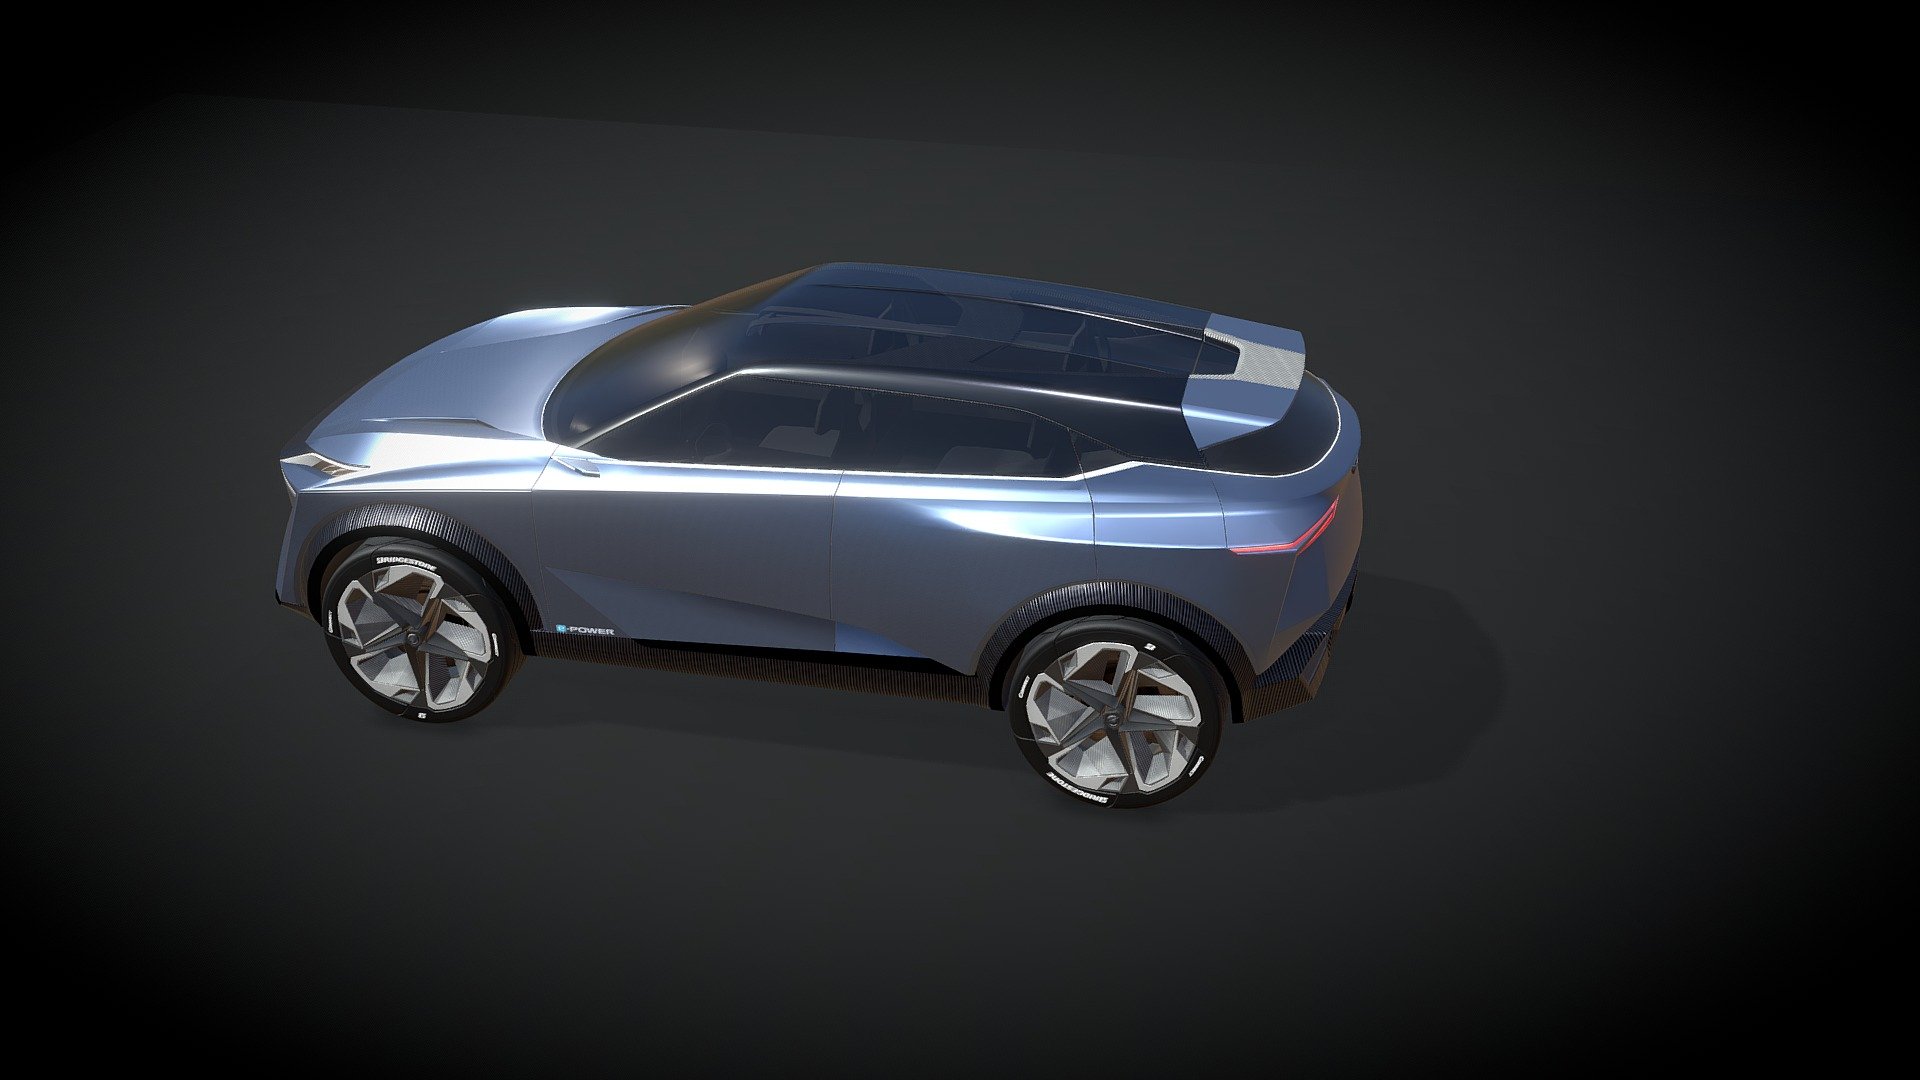 Nissan launches IMQ concept at 2019 Geneva Motor Show
Advanced design and all-wheel-drive e-POWER system
signal next generation of crossovers

GENEVA, Switzerland (March 5, 2019) – Nissan today unveiled the all-new IMQ
concept vehicle, an advanced technology and design showcase that signals the direction 
of the next generation of crossovers 3d model